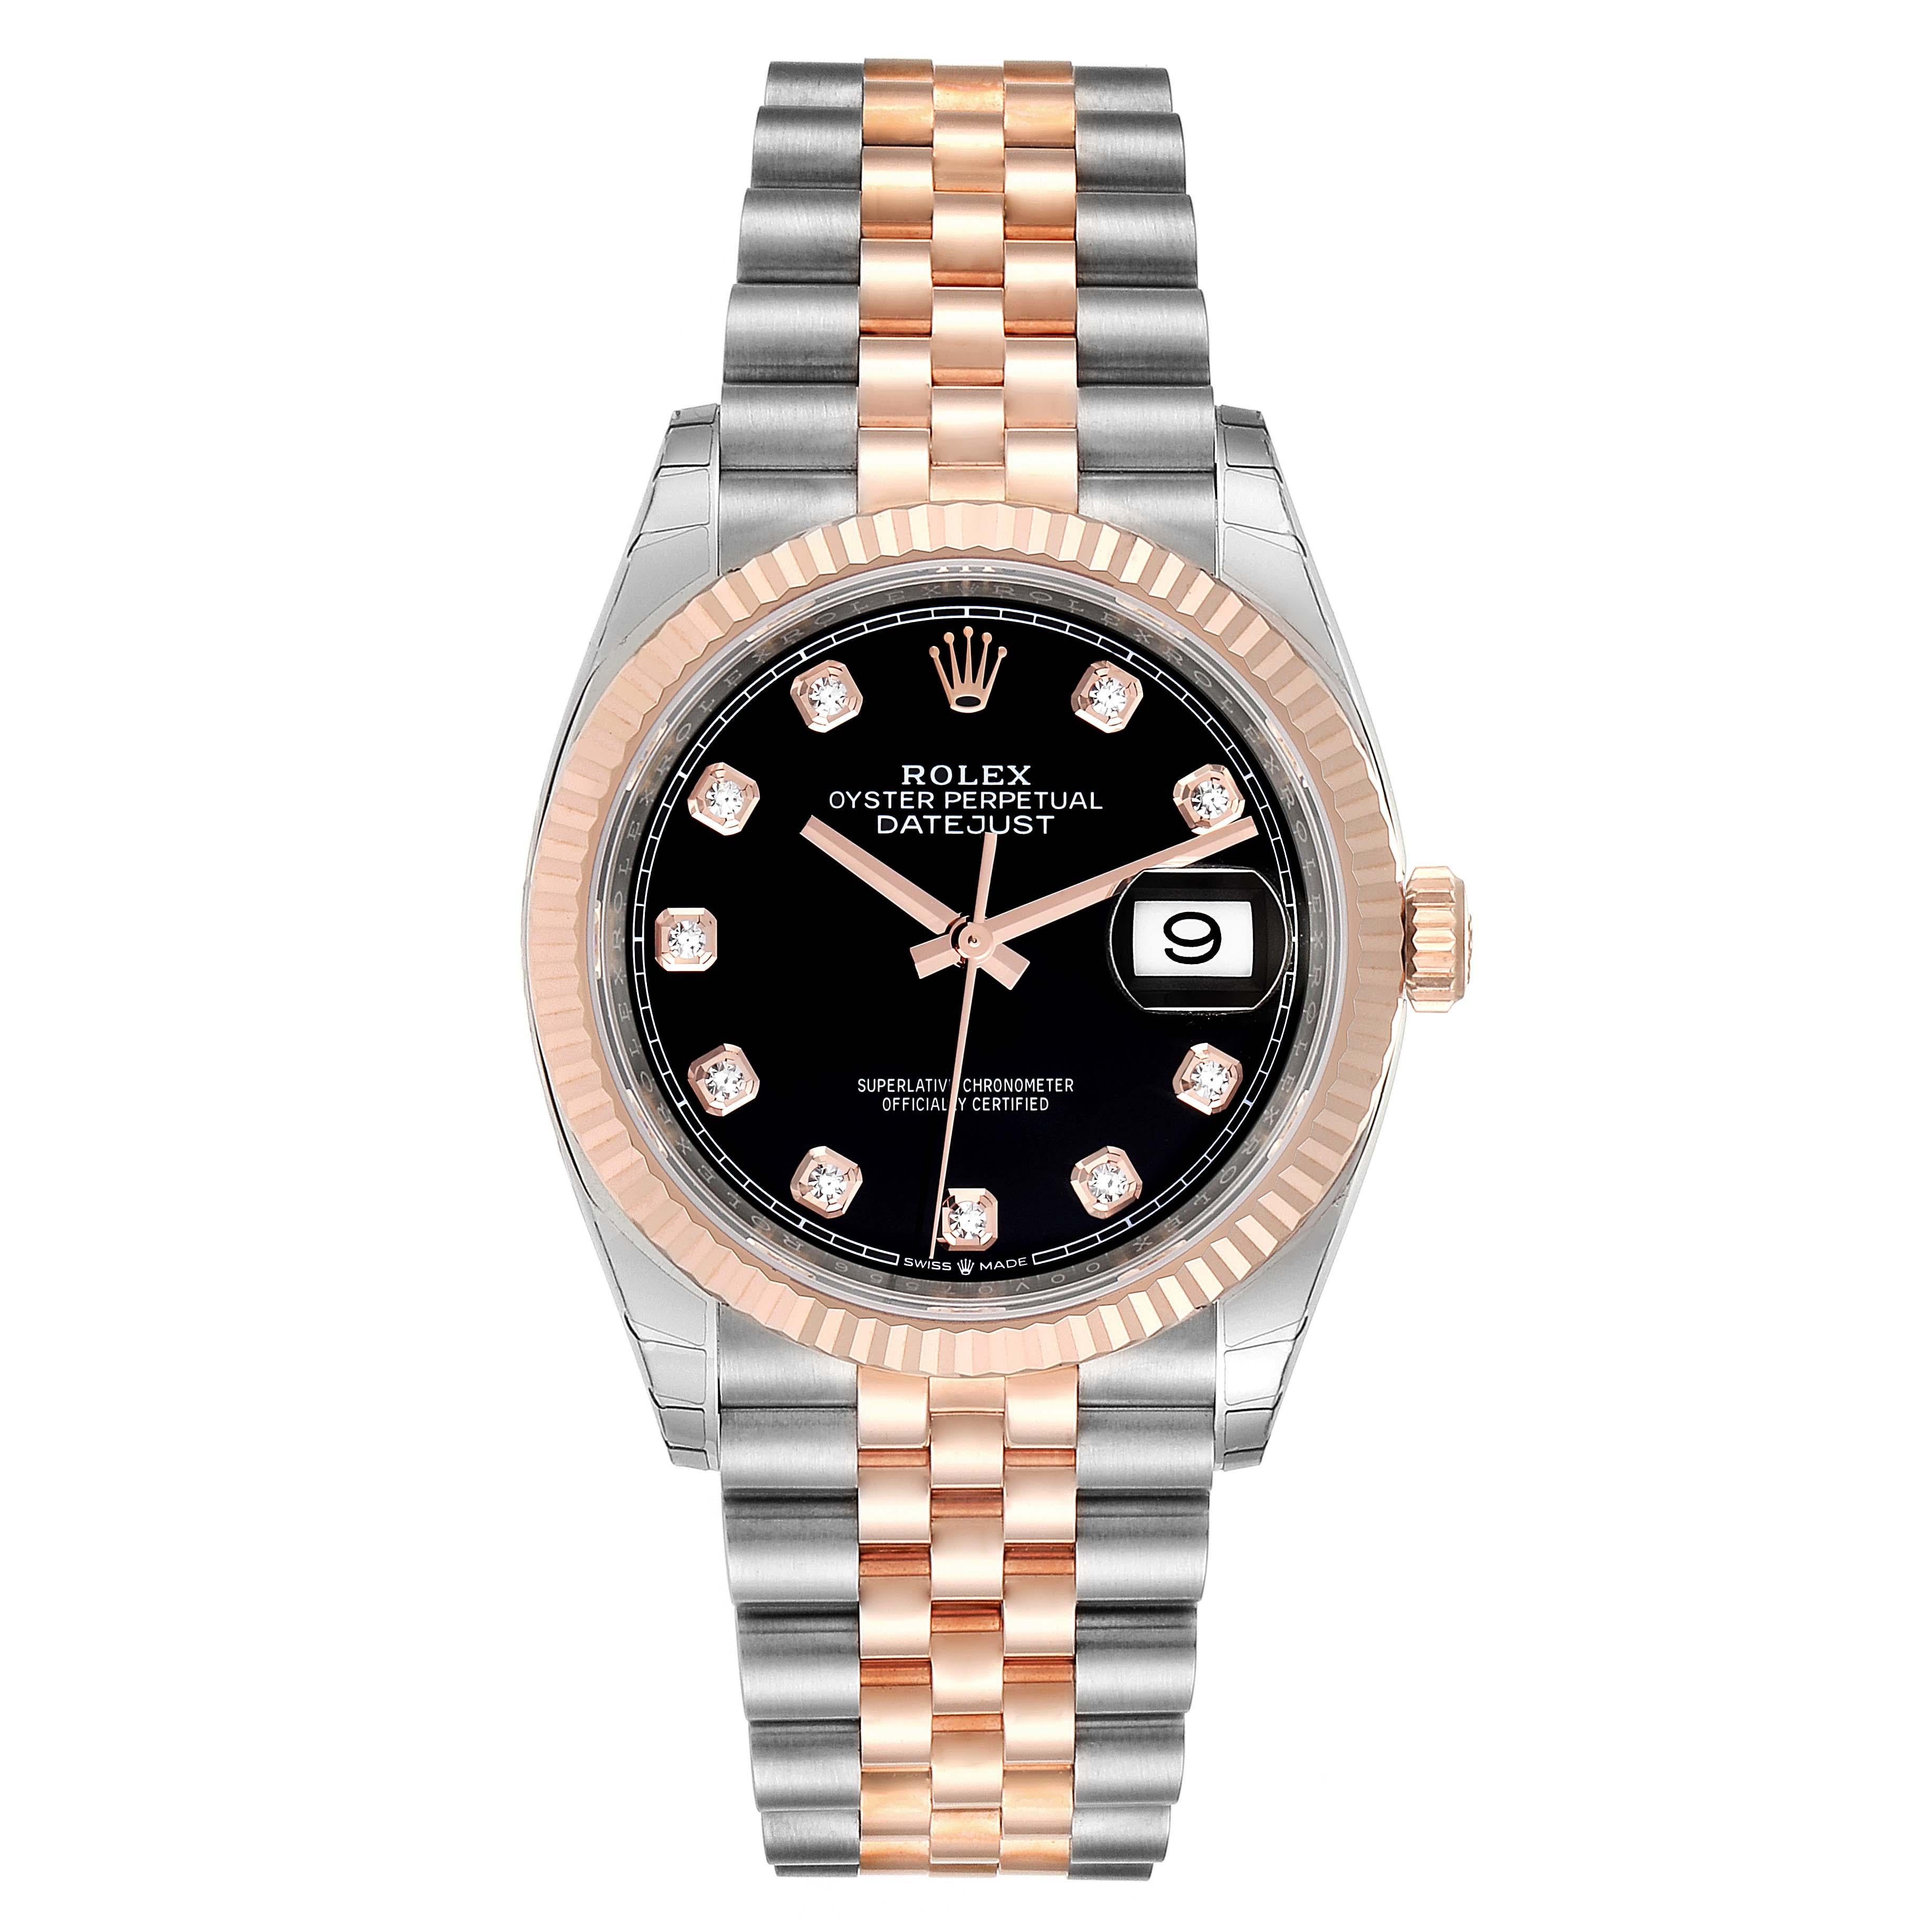 Rolex Datejust Black Diamond Dial Steel EveRose Gold Watch 126231 Unworn. Officially certified chronometer self-winding movement. Stainless steel case 36.0 mm in diameter. High polished lugs. Rolex logo on a 18K rose gold crown. 18k rose gold fluted